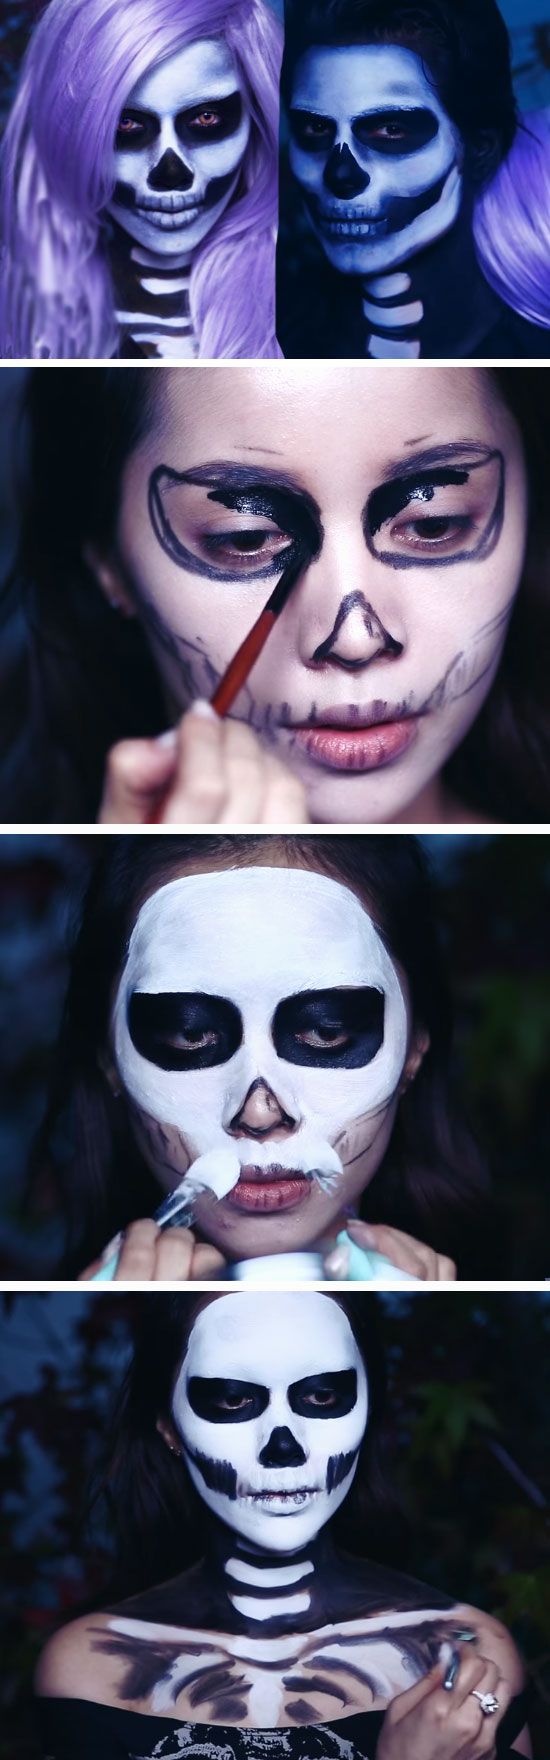 17 Absolutely Creepy Costumes and Make up for Halloween: 16. Whole body ...